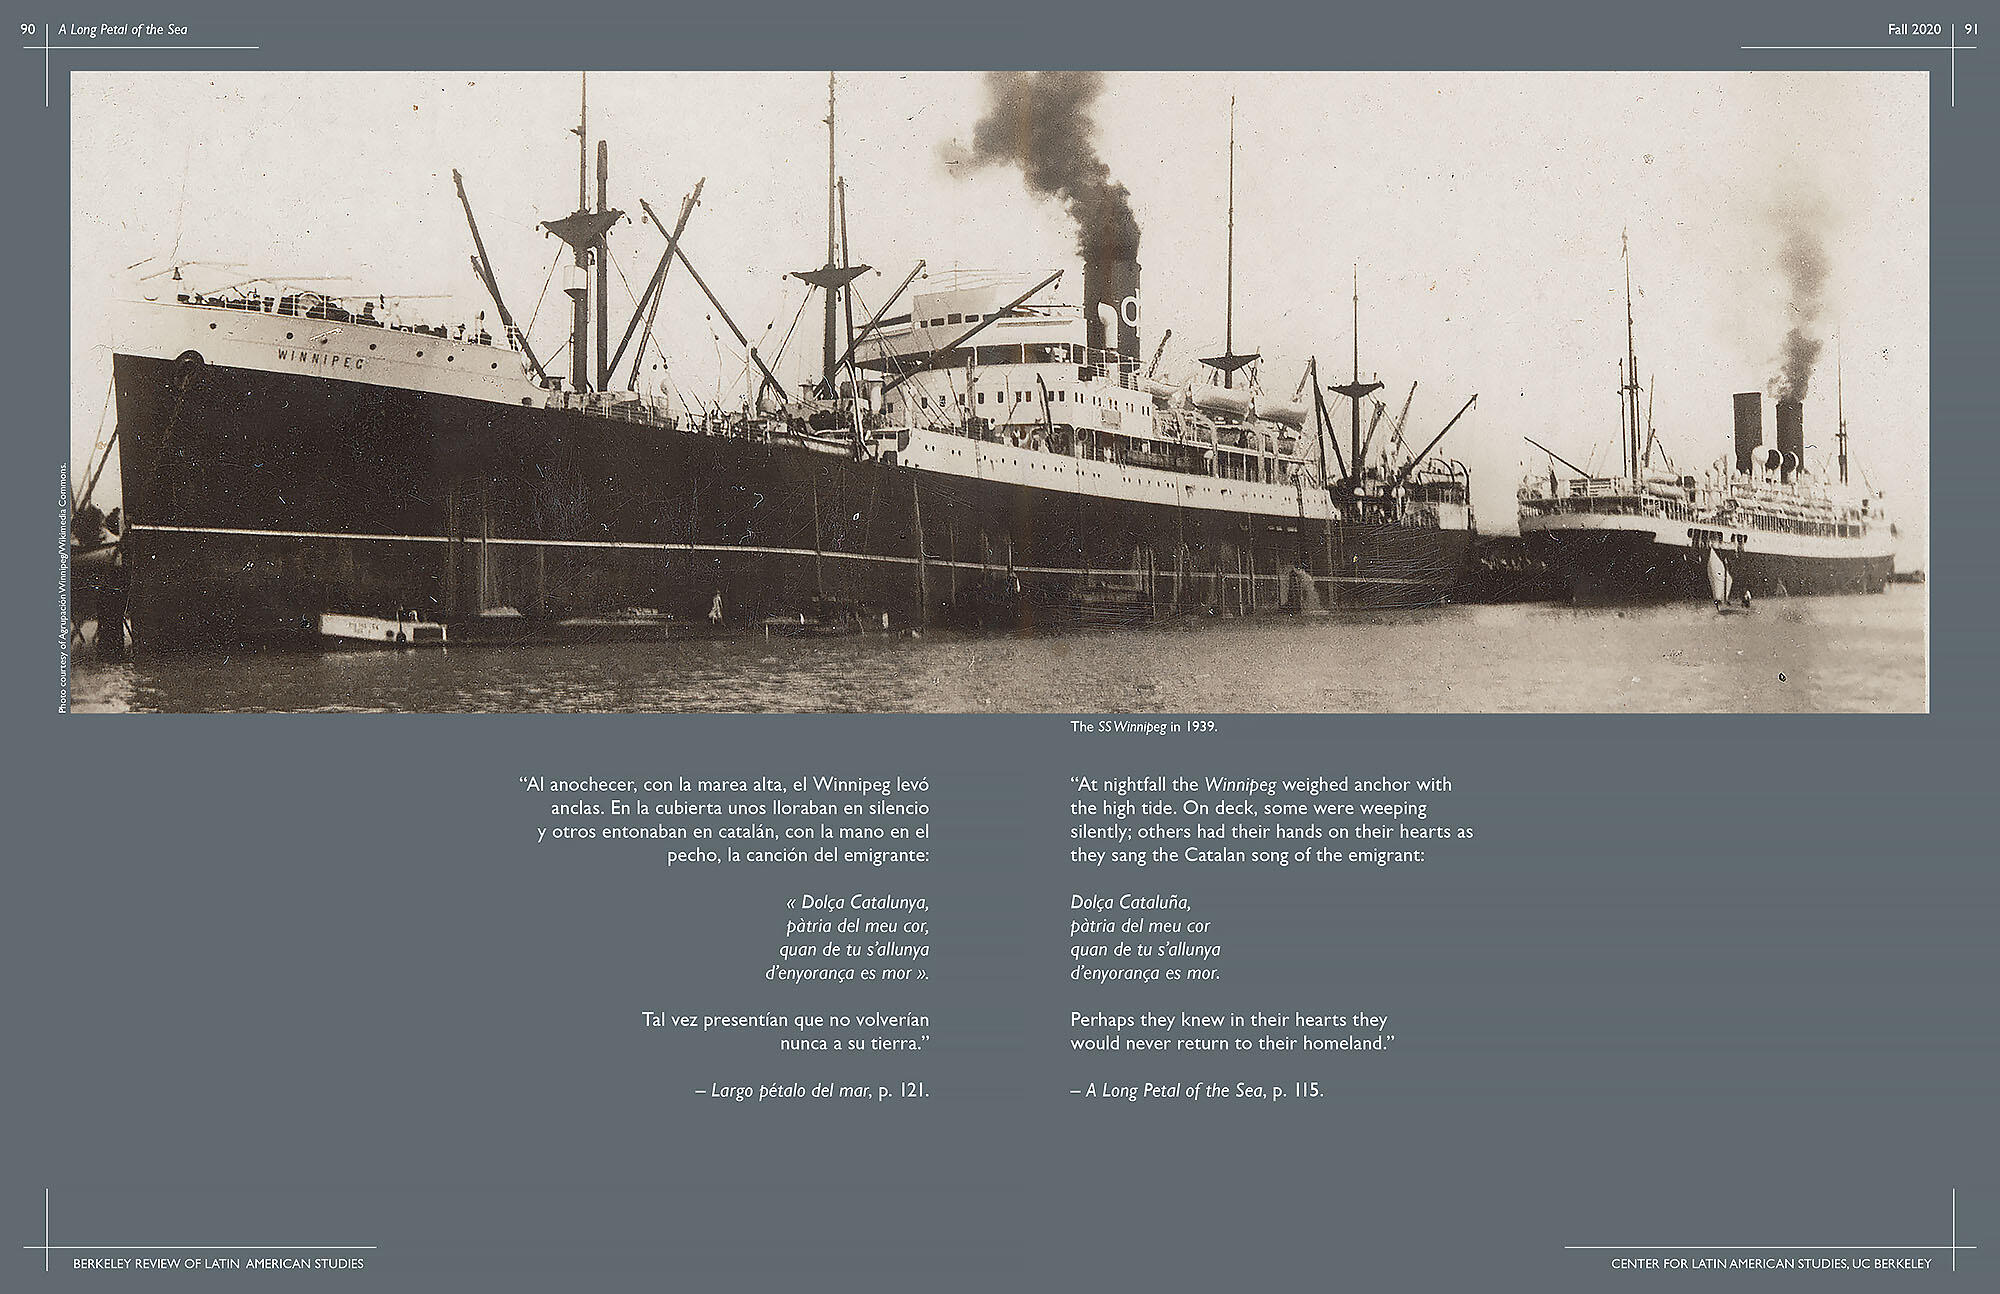 Excerpts from A Long Petal of the Sea, with a photo of the SS Winnipeg in 1939. (Photo courtesy of Agrupación Winnipeg/Wikimedia Commons.)